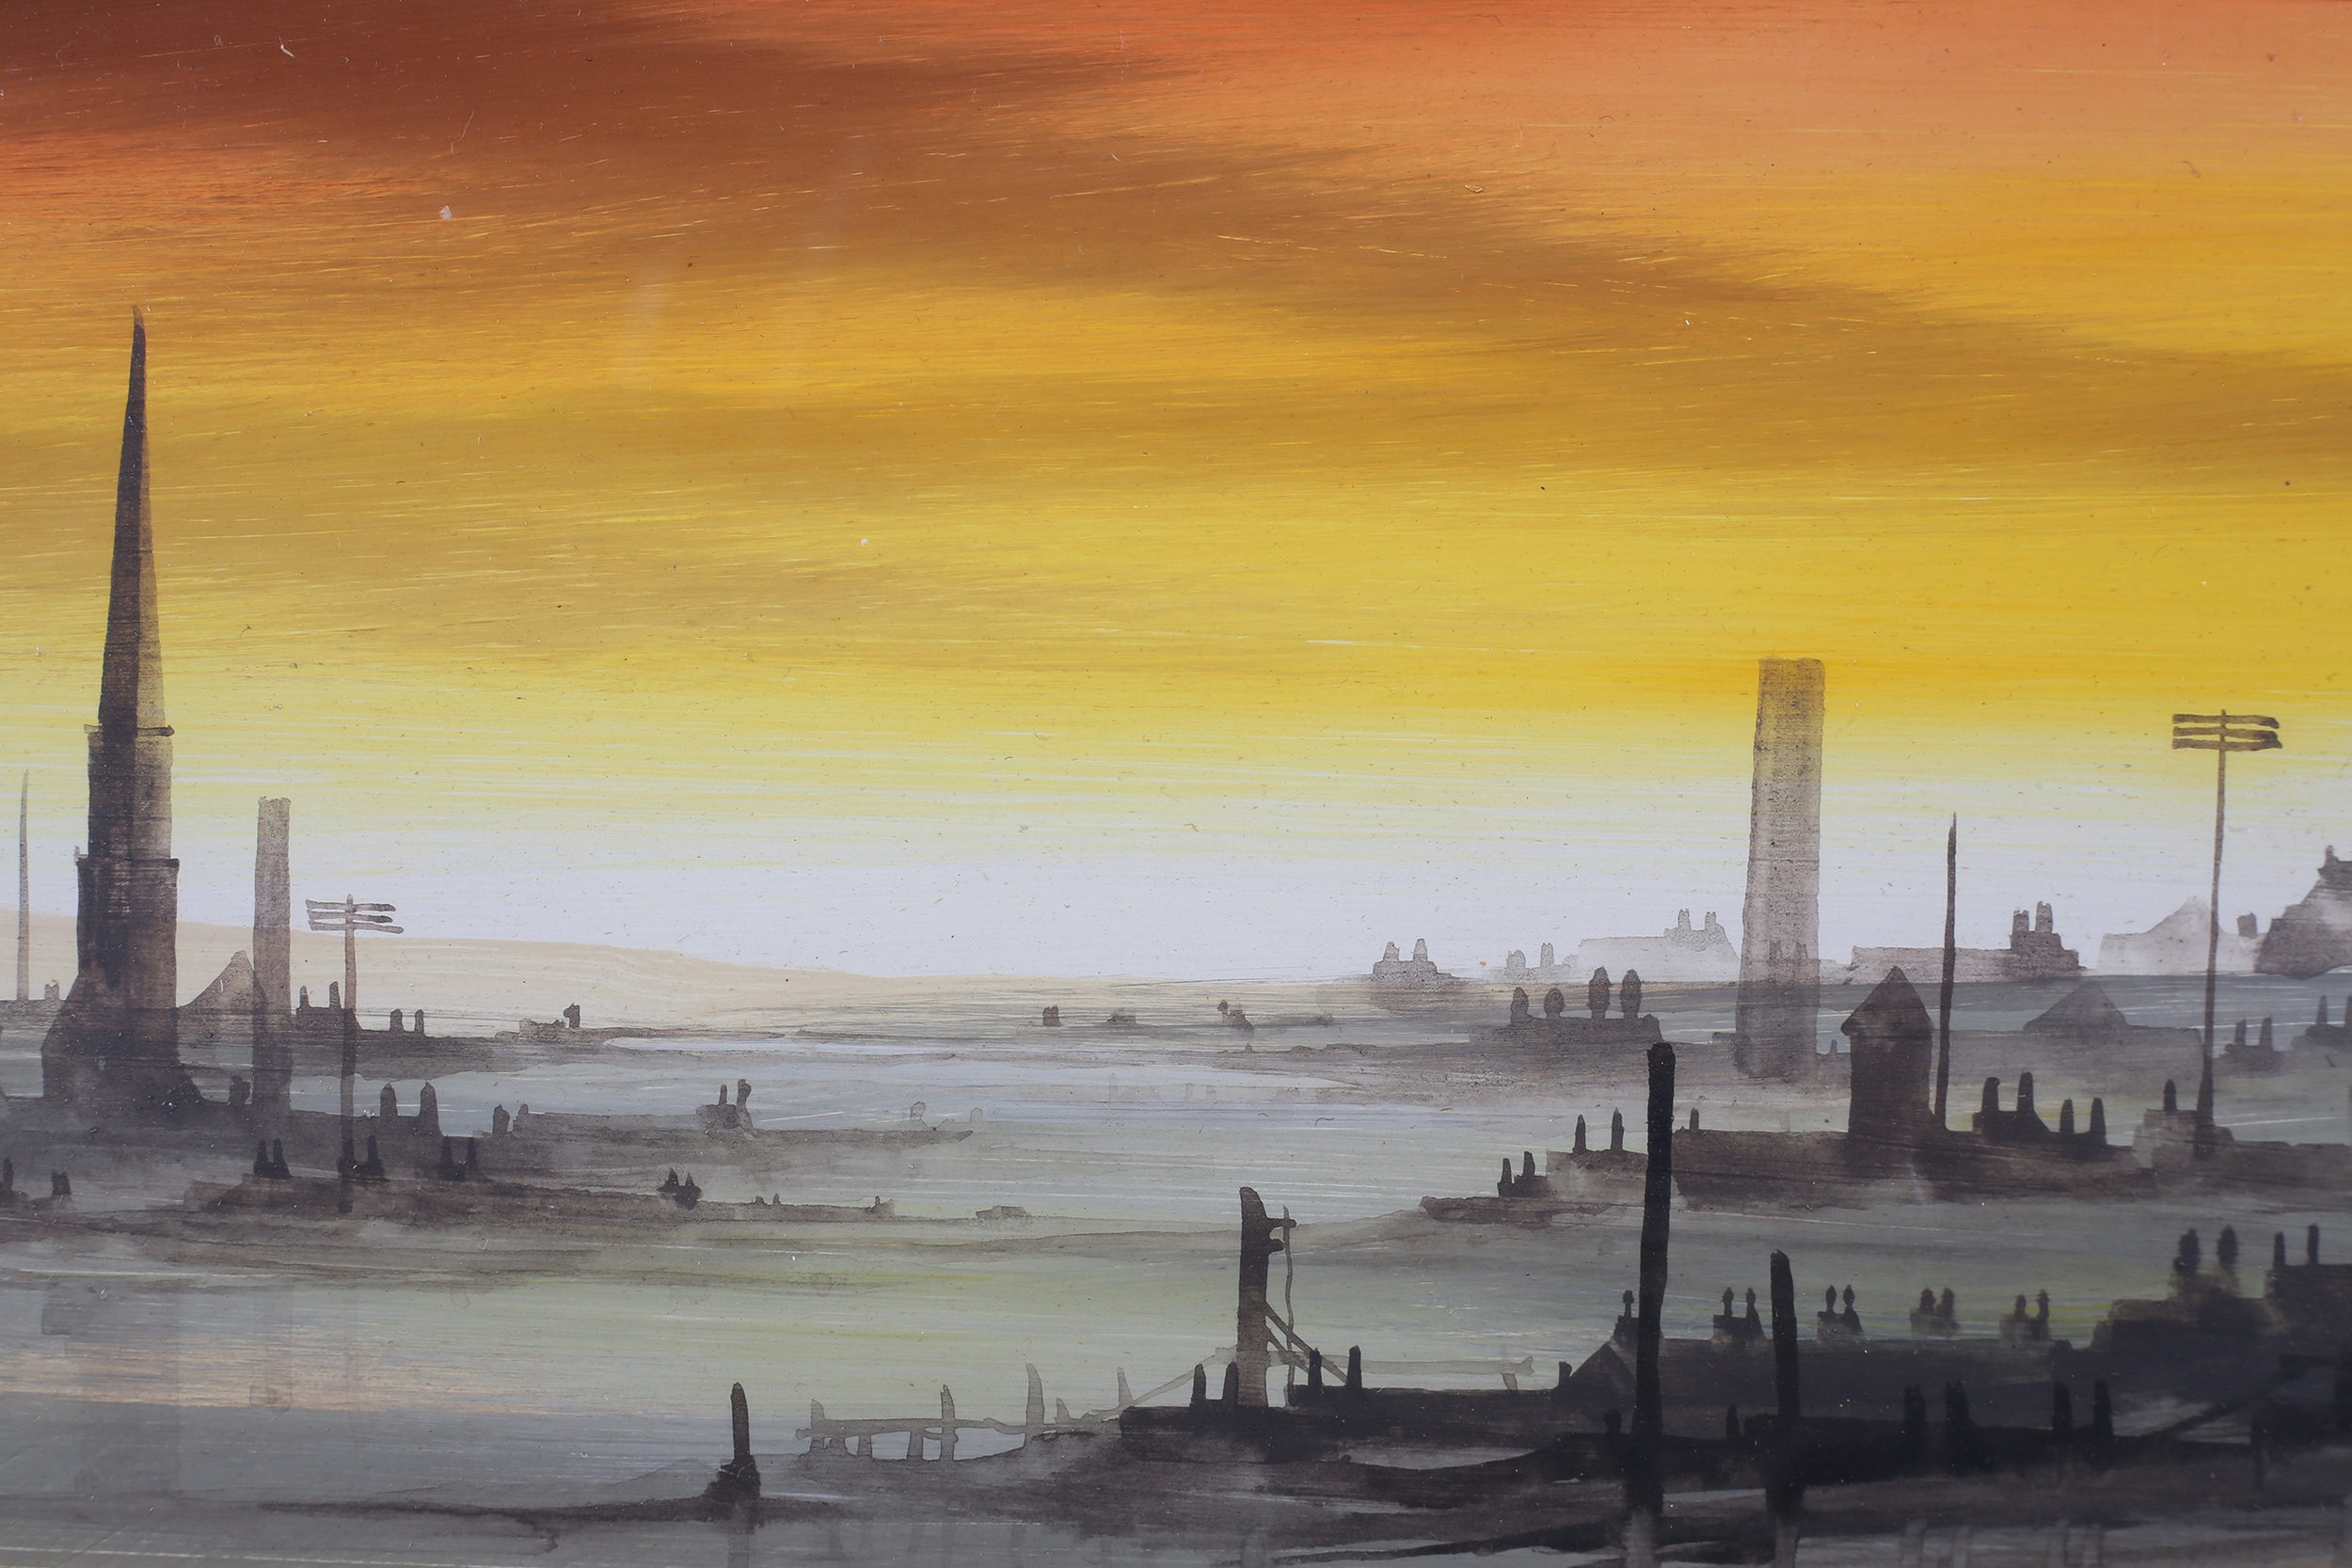 ARR Brian Shields 'Braaq' (1951-1997), Tuesday Toil, industrial water way under evening skies, - Image 3 of 5